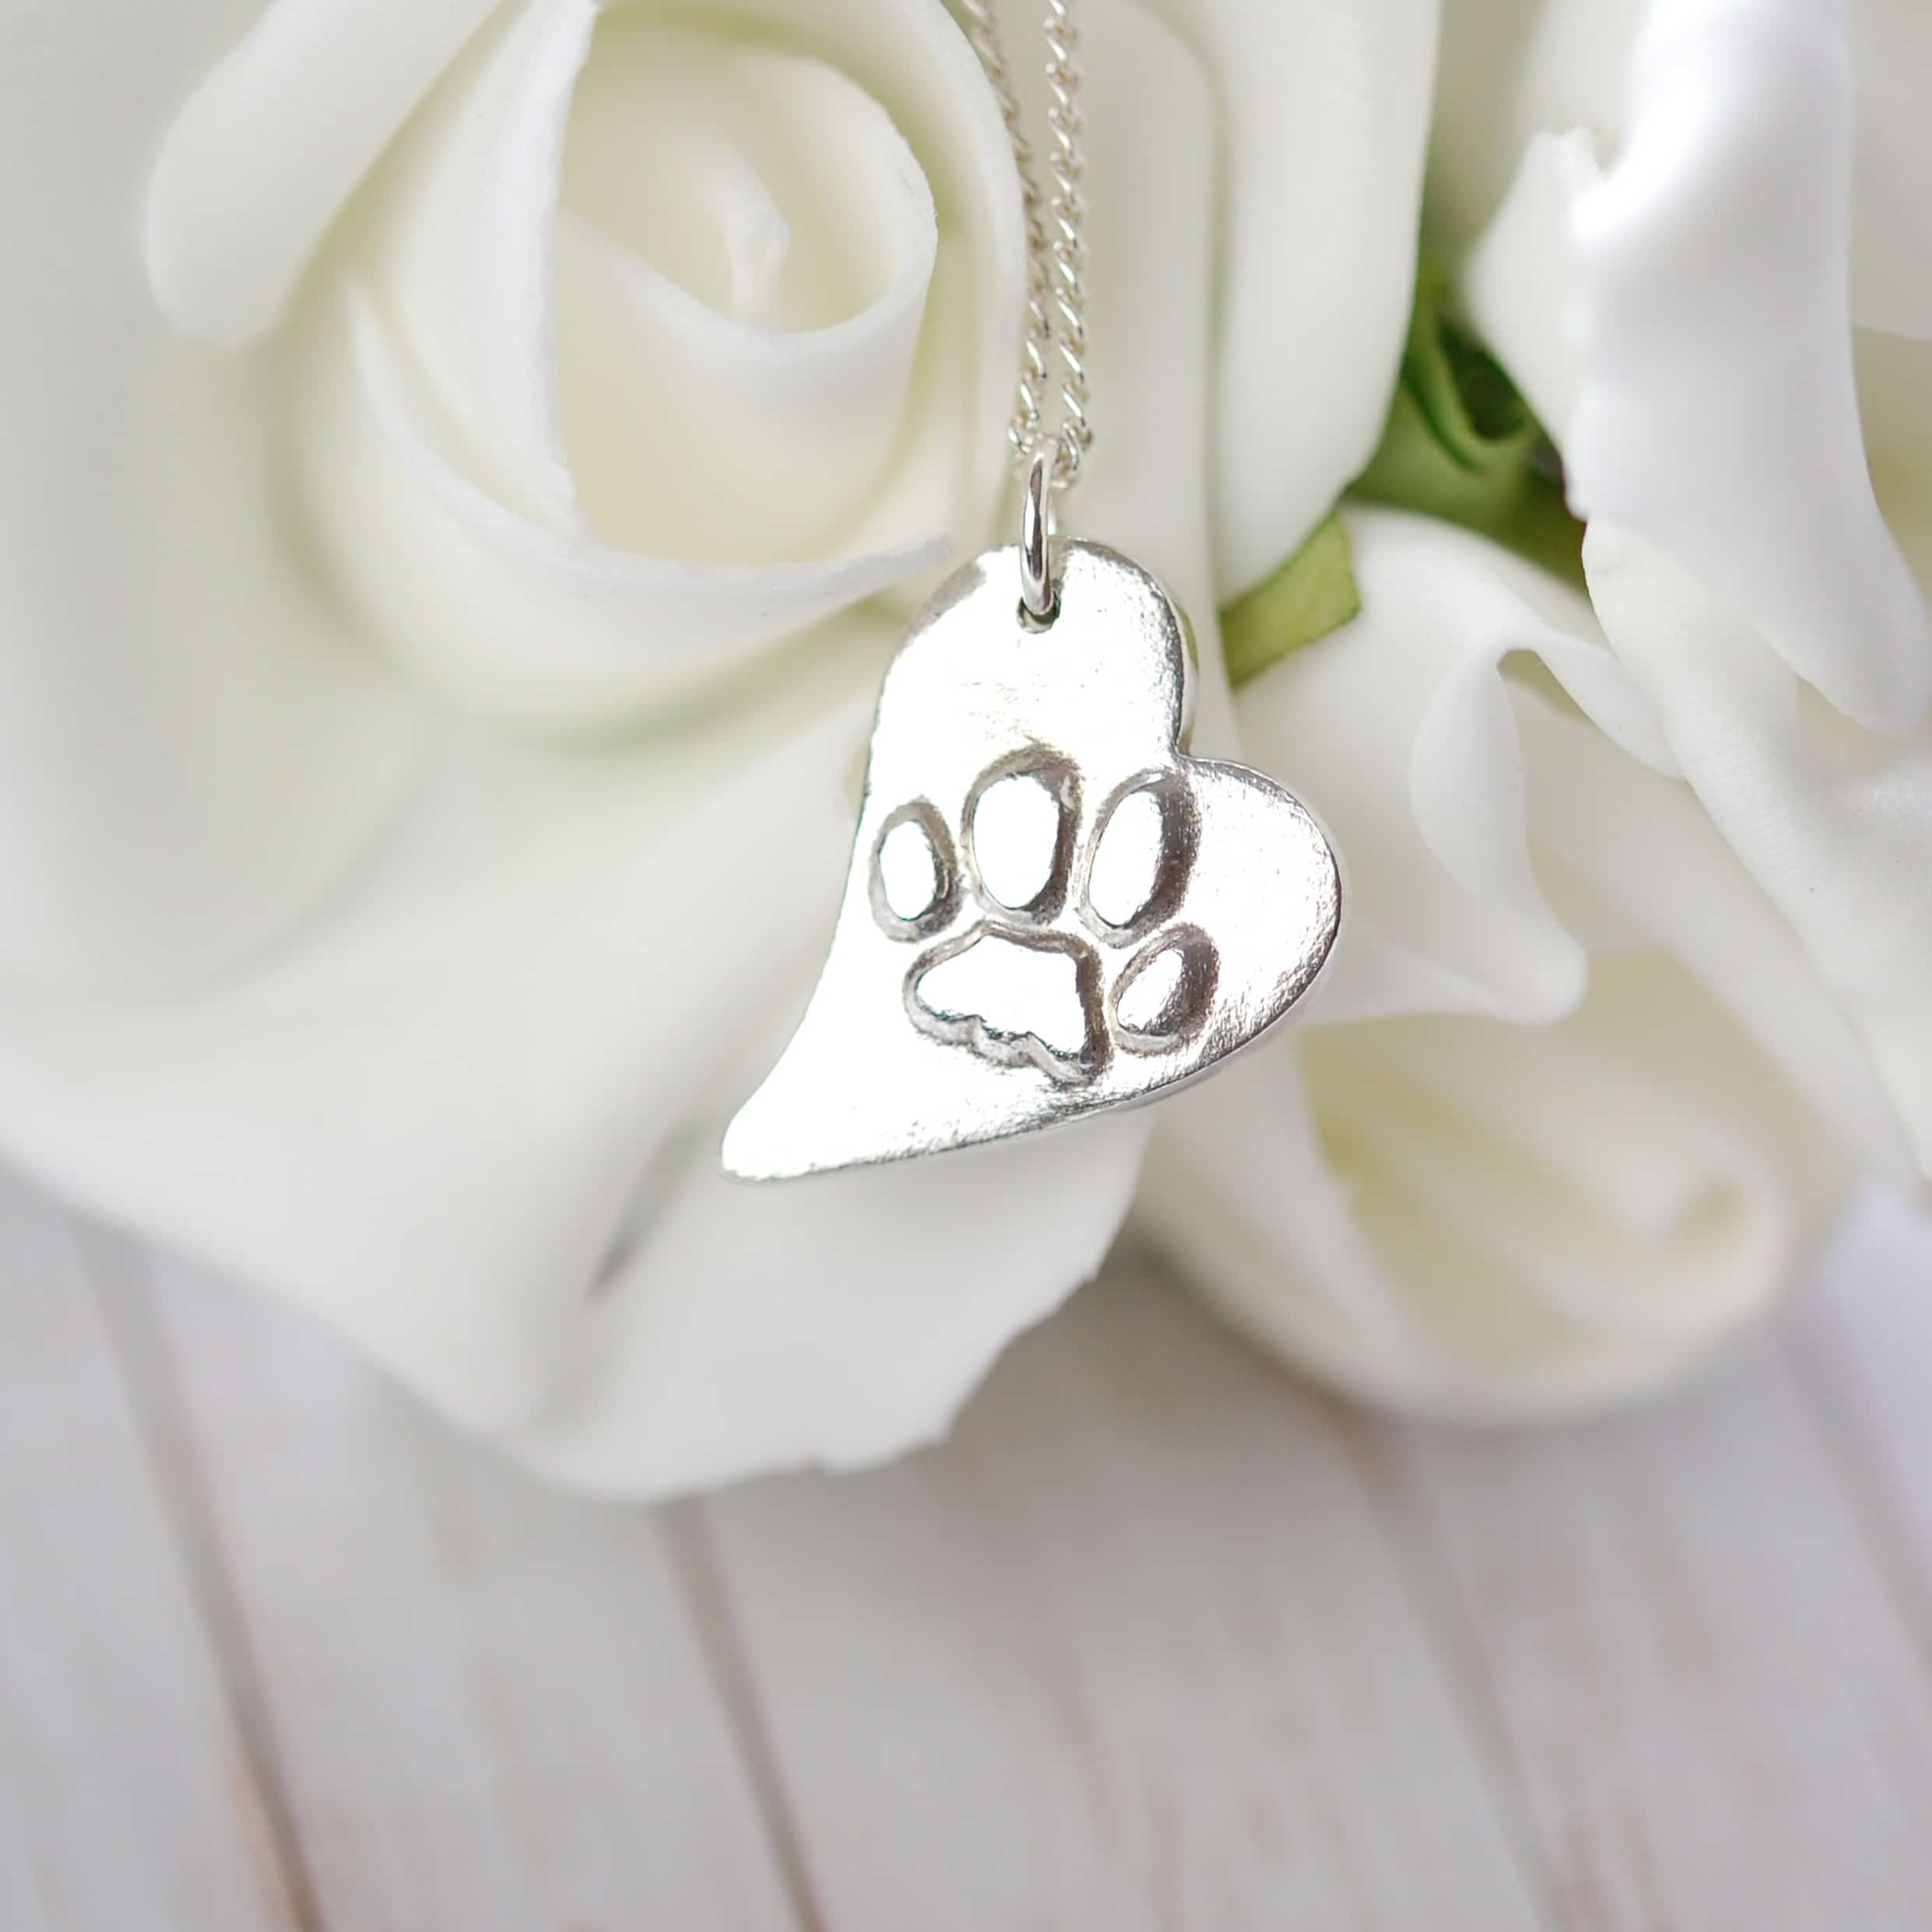 Regular silver raised paw print charm and snake chain